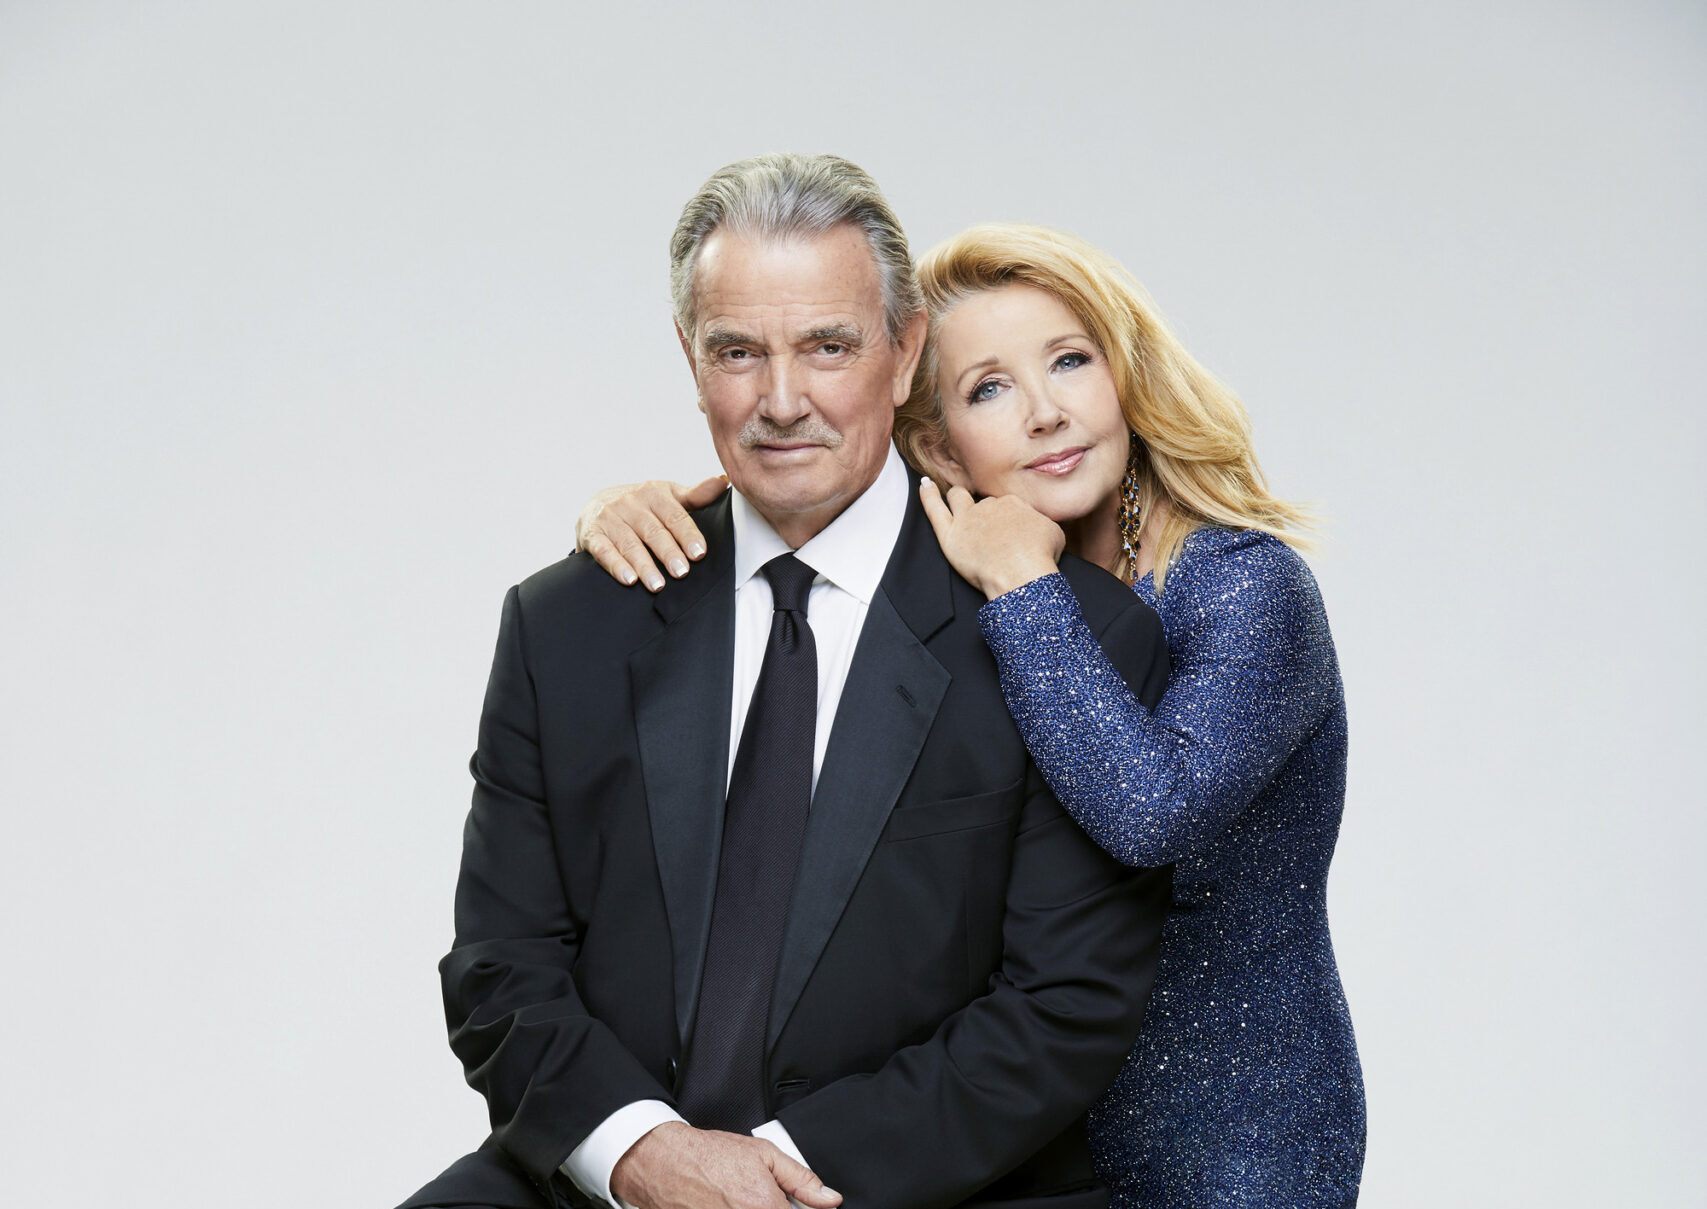 Eric Braeden and Melody Thomas Scott from The Young and the Restless on CBS